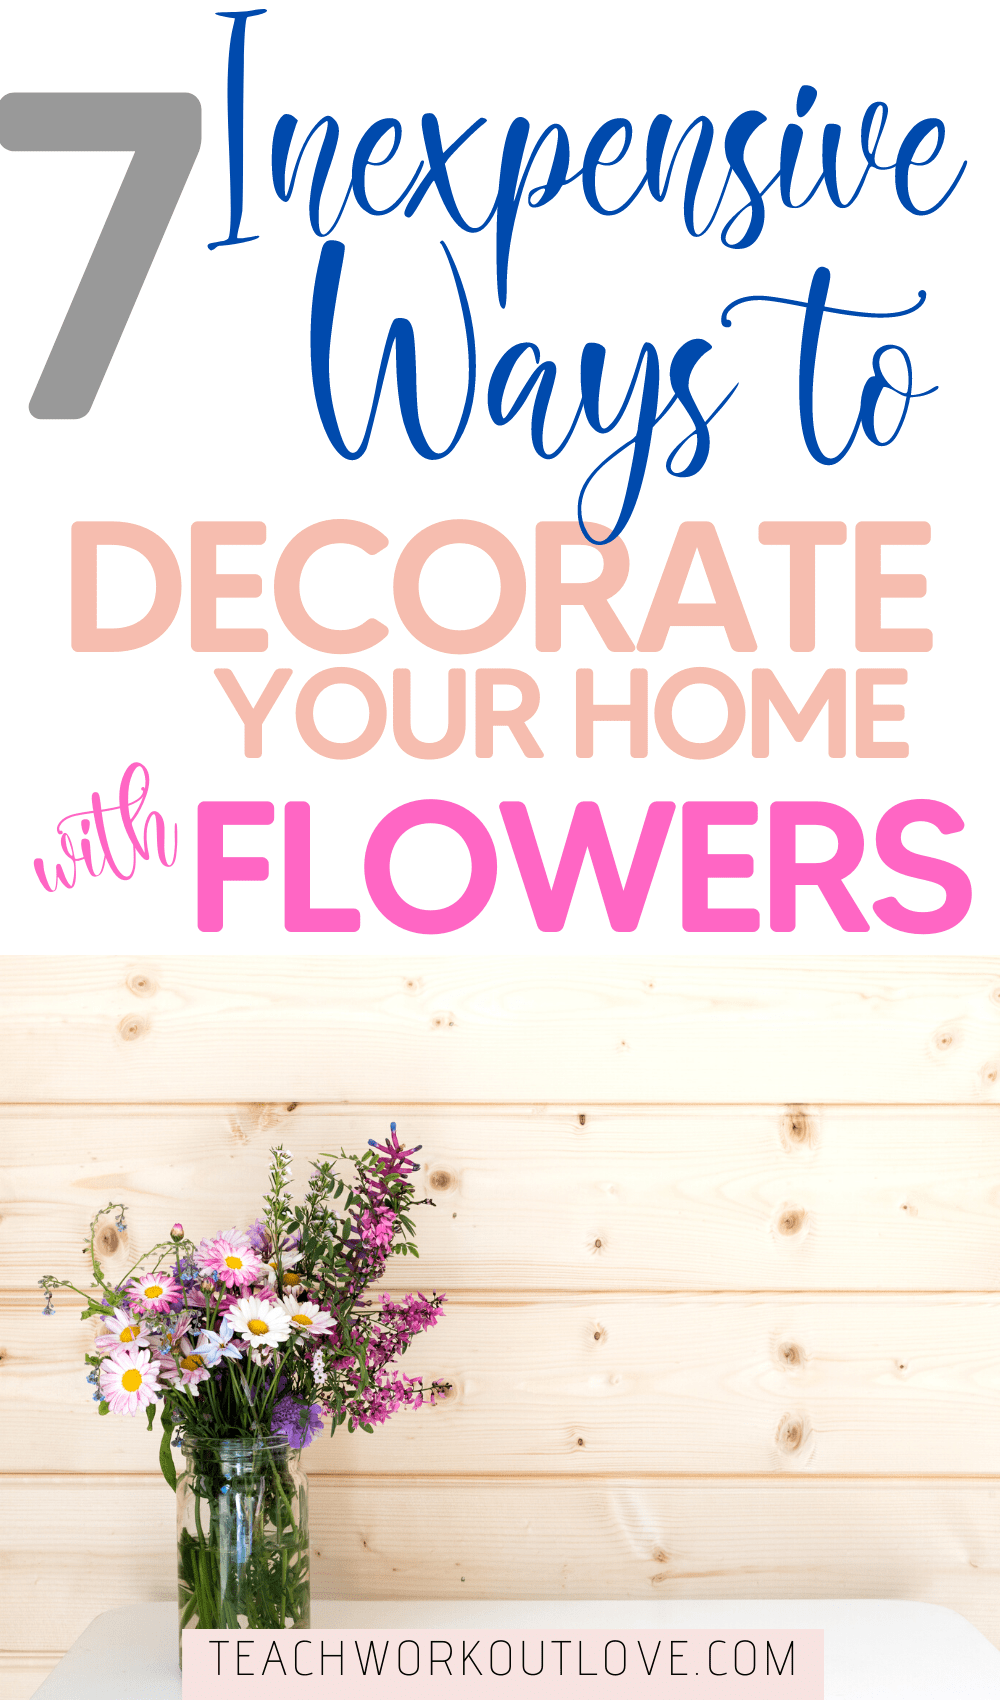 Love to decorate your home with flowers? Find out exactly how you can decorate with flowers and significantly improve the environment you live in.